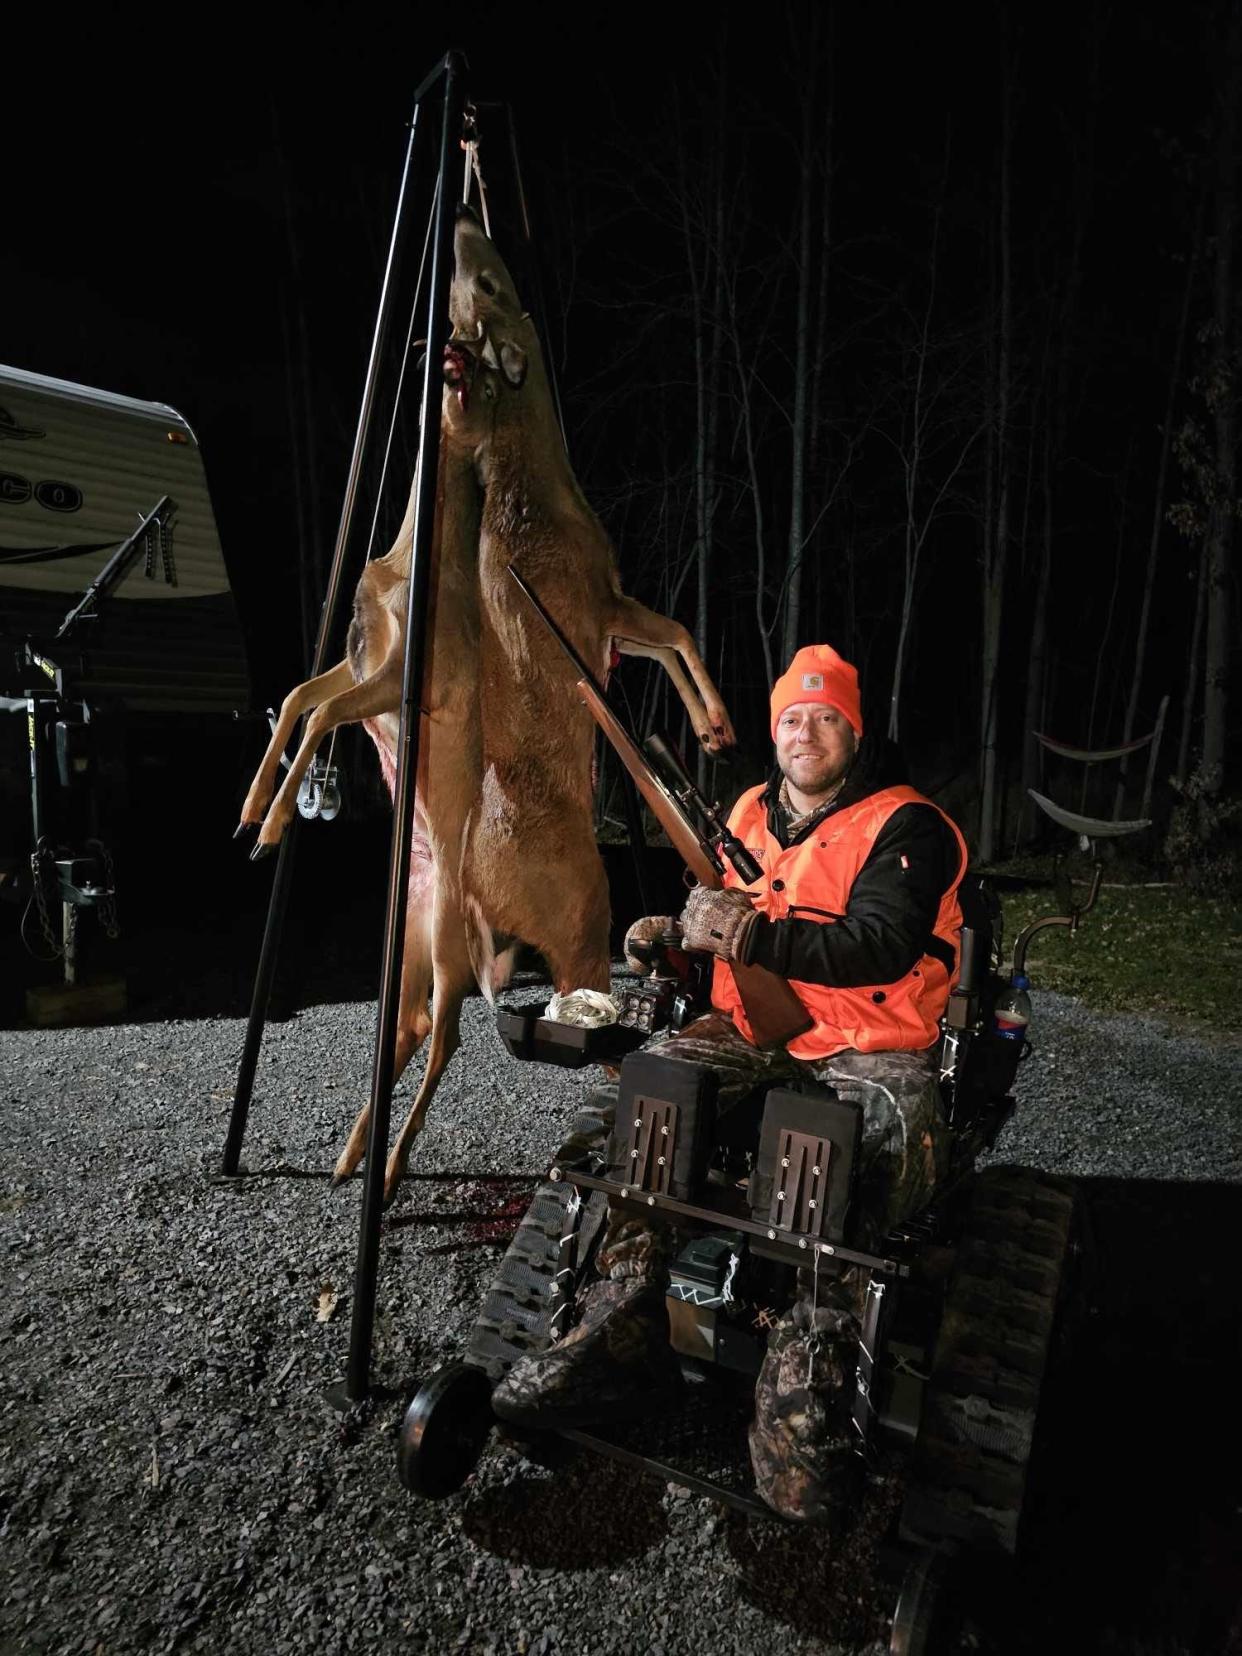 Brian Ortner was able to cross one item off his bucket list last hunting season. He hunted on his property between Stevens Point and Wisconsin Rapids, and he got his deer.